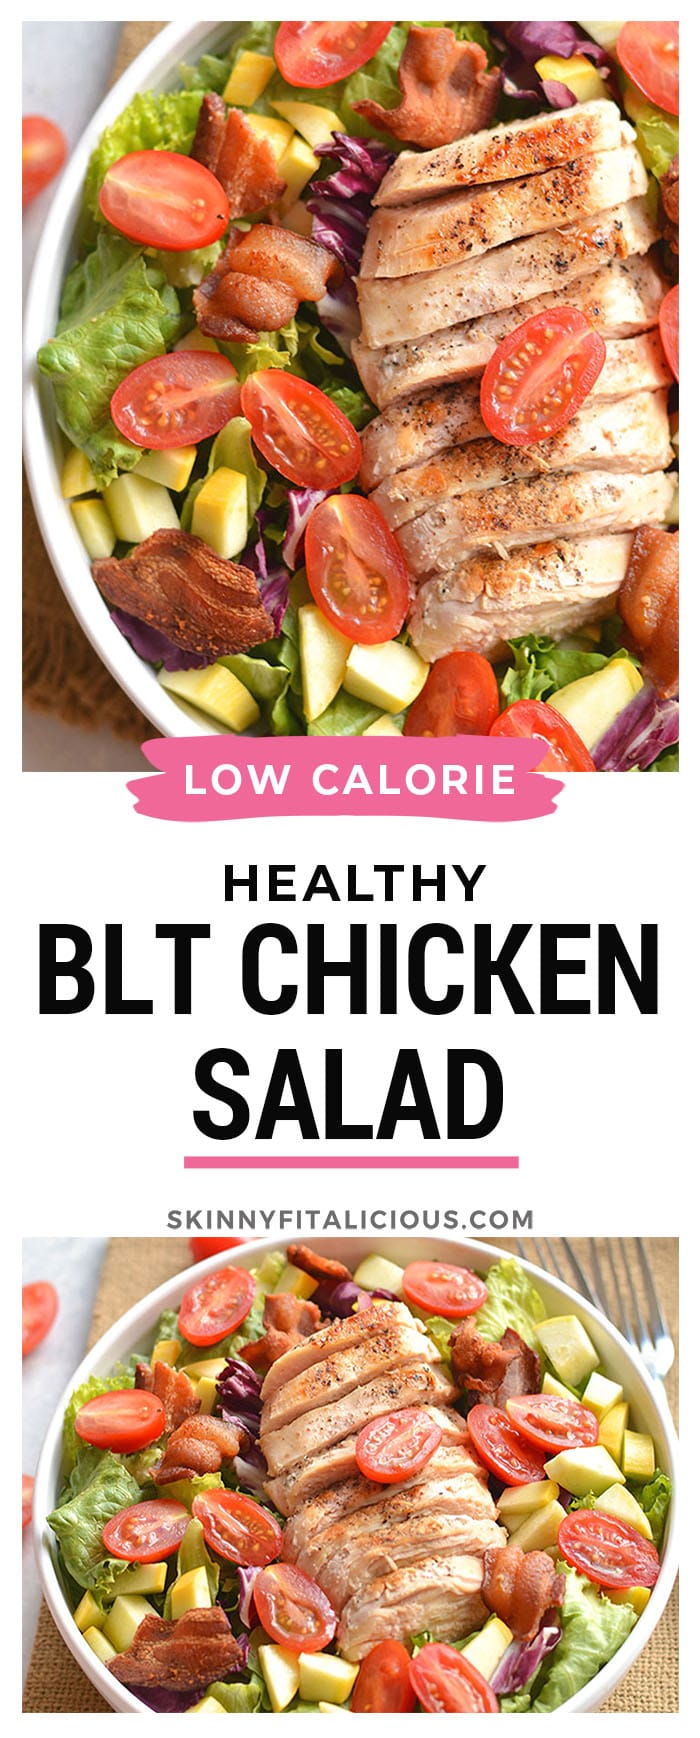 Low Carb BLT Grilled Chicken Salad! A healthy lunch or dinner topped with fresh lettuce, veggies, turkey bacon and a lighter salad dressing.